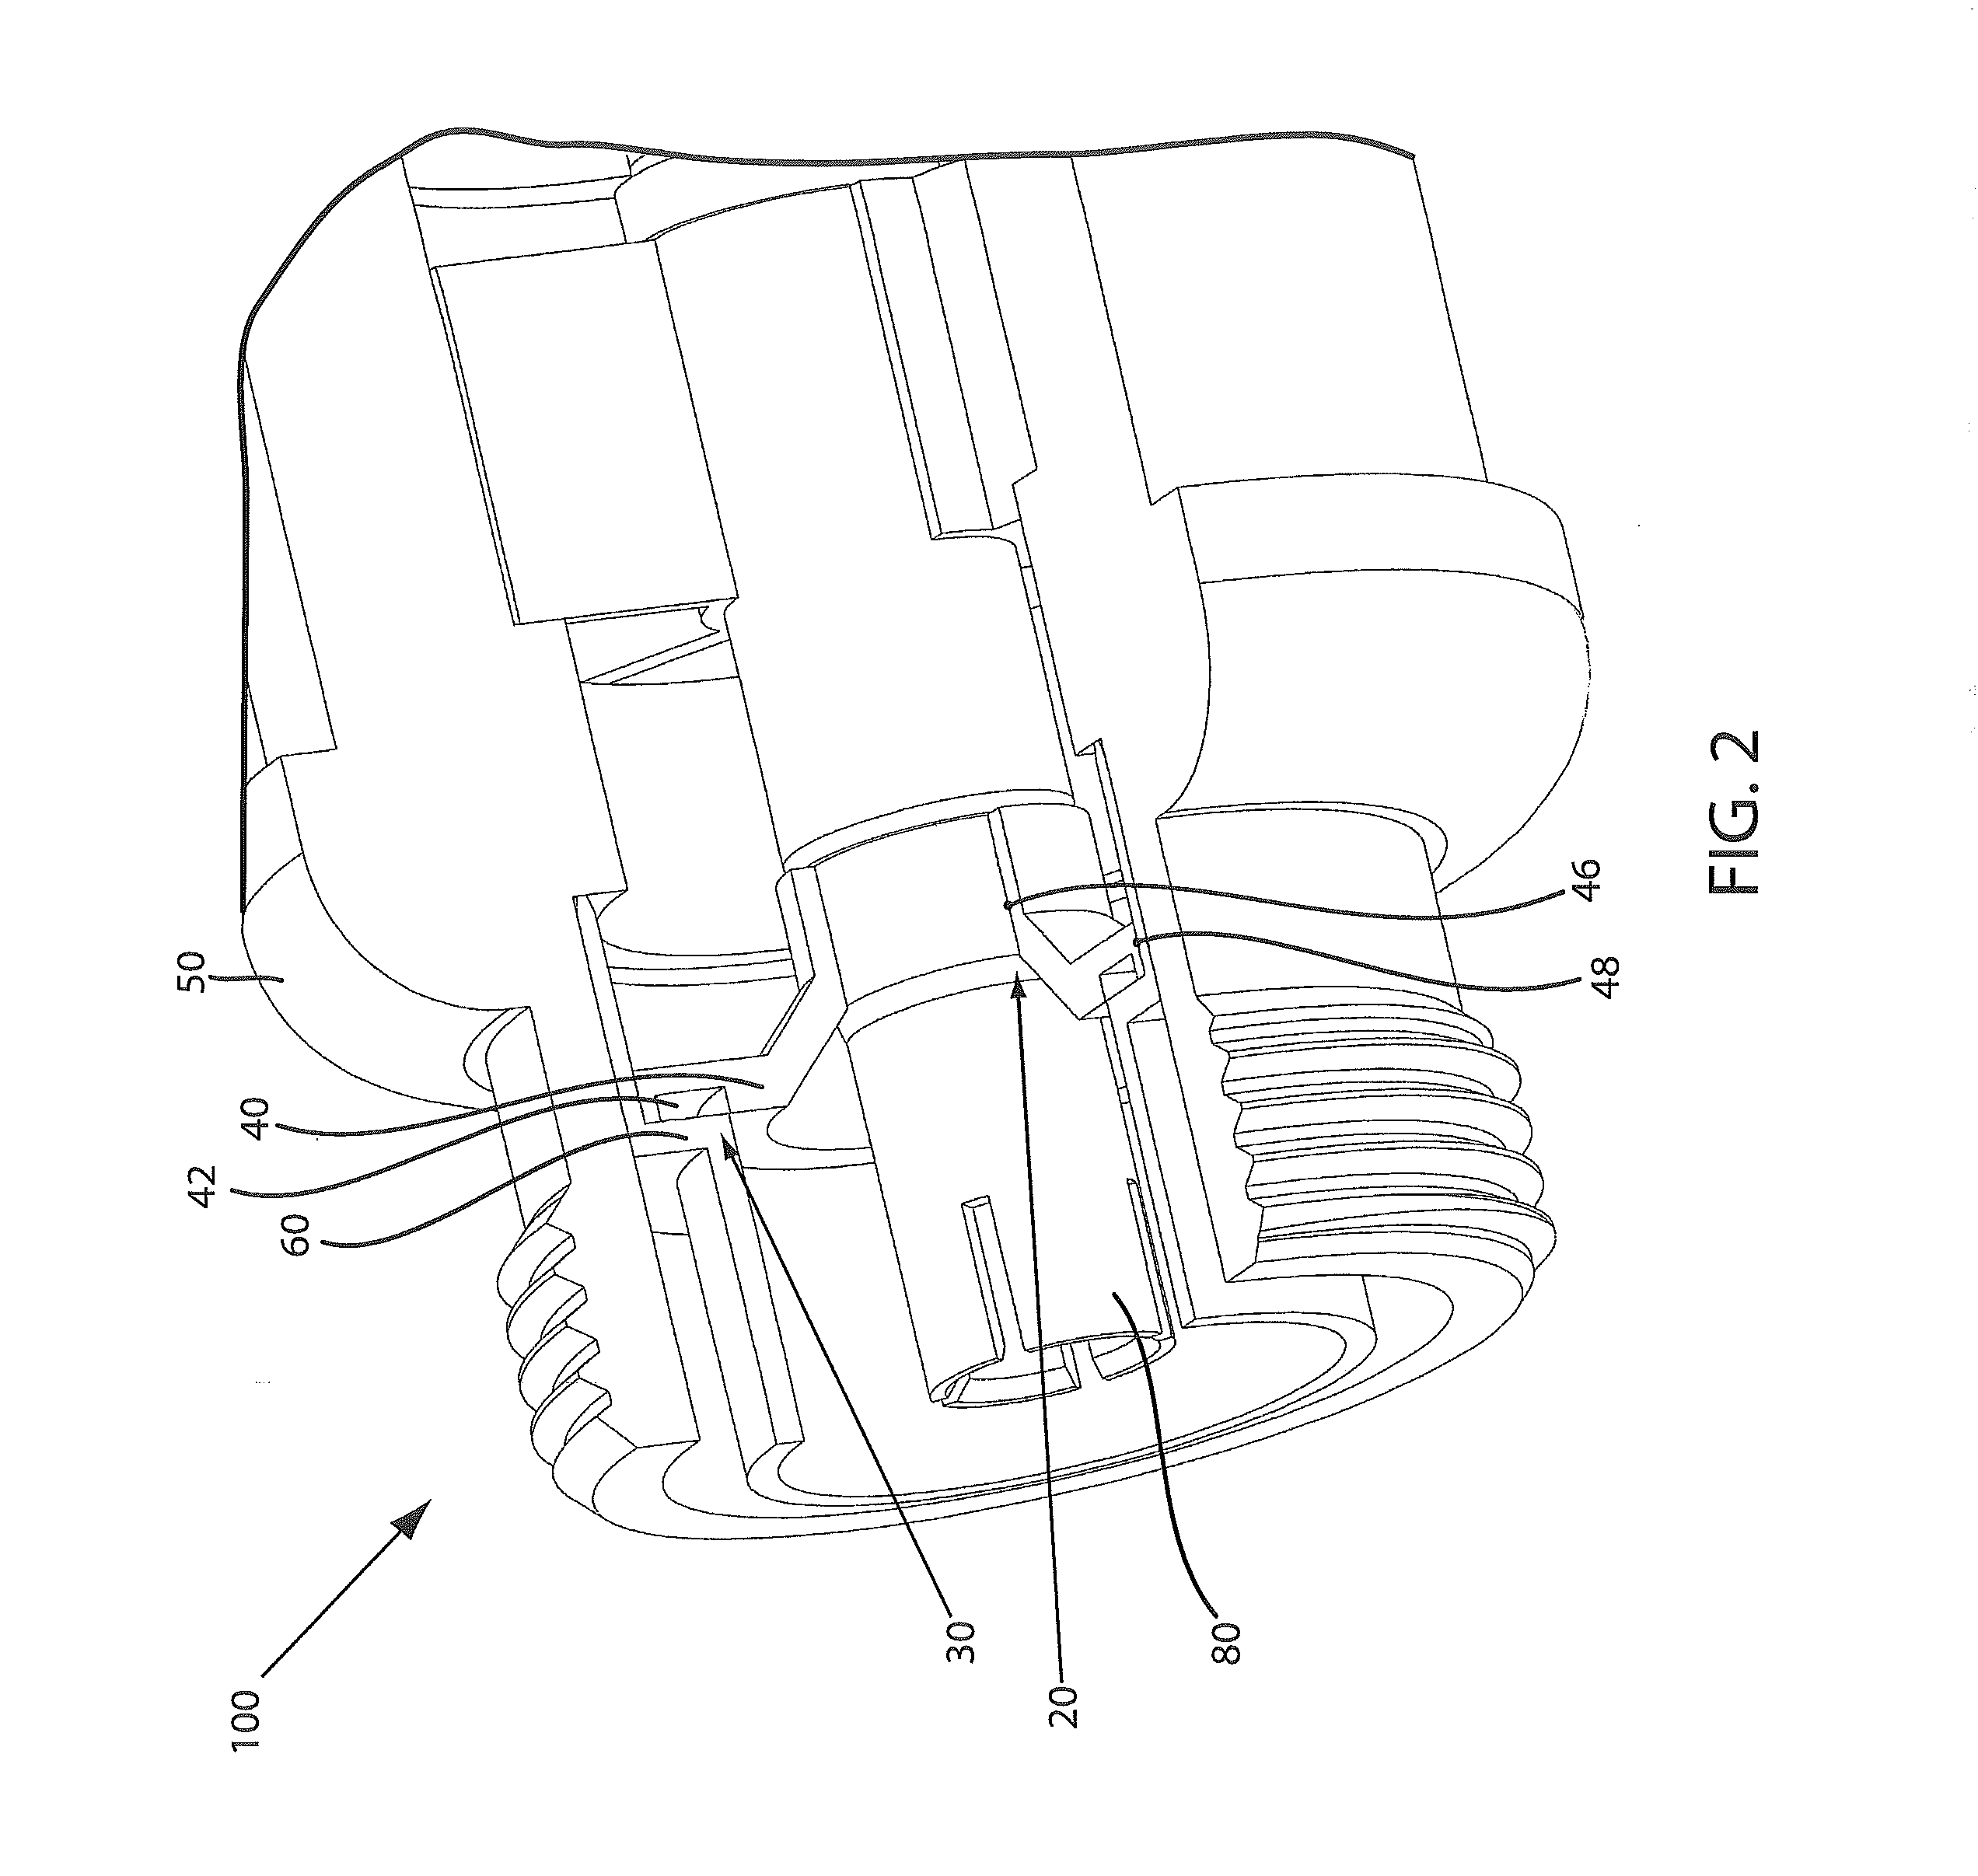 Coaxial cable connector with internal floating ground circuitry and method of use thereof